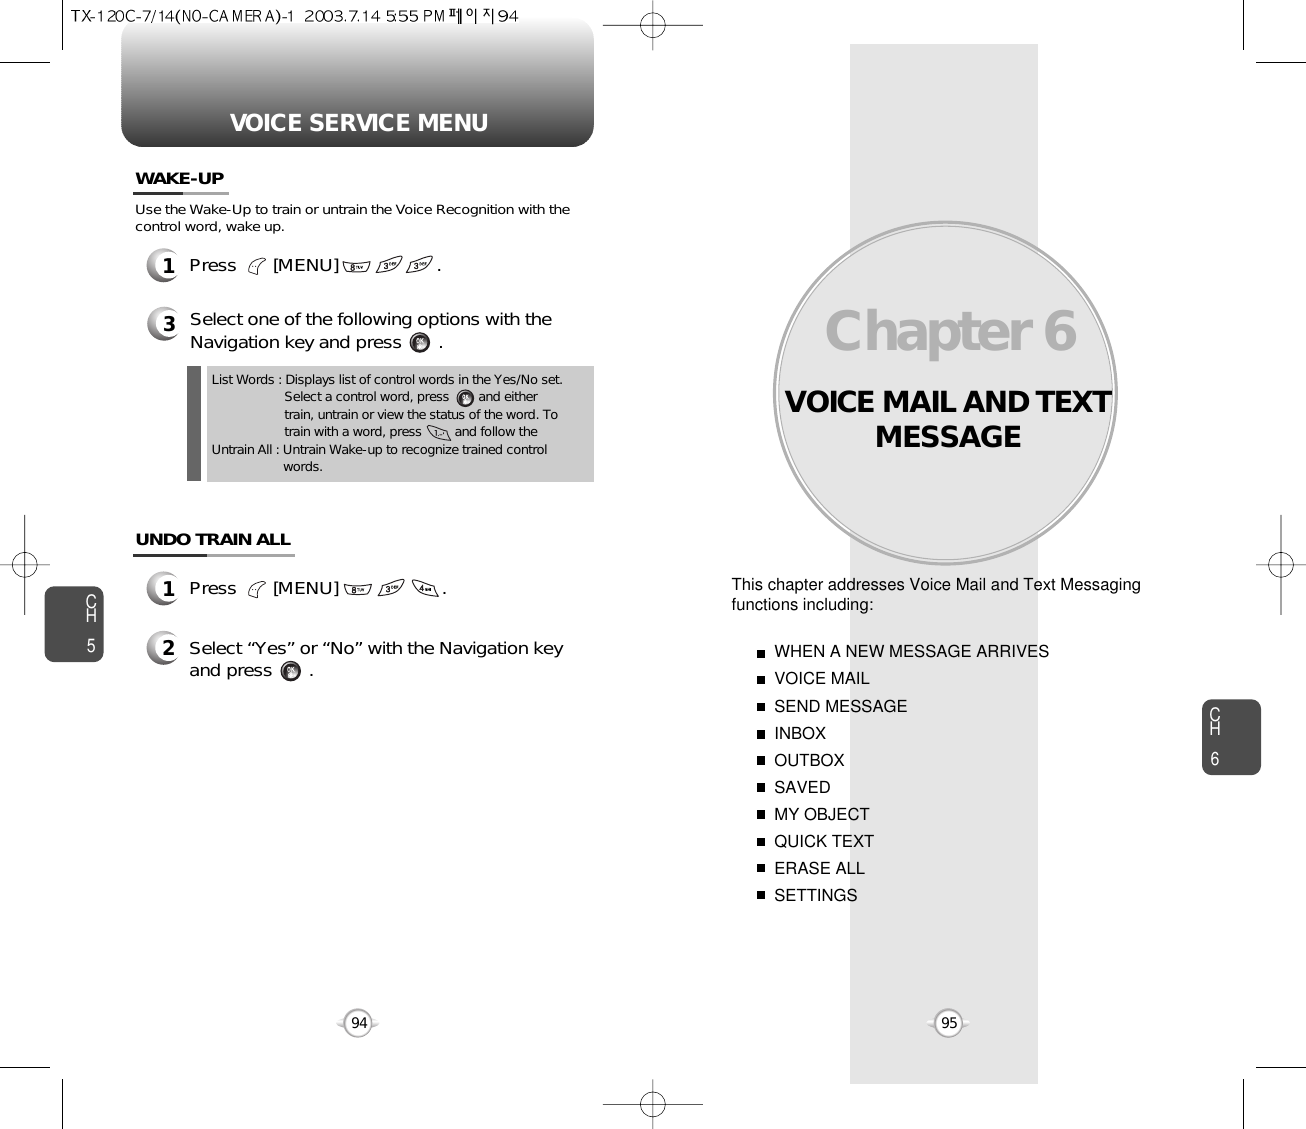 VOICE MAIL AND TEXTMESSAGEThis chapter addresses Voice Mail and Text Messagingfunctions including: WHEN A NEW MESSAGE ARRIVESVOICE MAILSEND MESSAGEINBOXOUTBOXSAVEDMY OBJECTQUICK TEXTERASE ALLSETTINGSChapter 69594CH695VOICE SERVICE MENUCH5WAKE-UP1Press       [MENU]                    .UNDO TRAIN ALL2Select “Yes” or “No” with the Navigation key and press       .Press       [MENU]                   .1Use the Wake-Up to train or untrain the Voice Recognition with thecontrol word, wake up.3Select one of the following options with theNavigation key and press       .List Words : Displays list of control words in the Yes/No set.Select a control word, press        and either train, untrain or view the status of the word. To train with a word, press         and follow the Untrain All : Untrain Wake-up to recognize trained control  words.